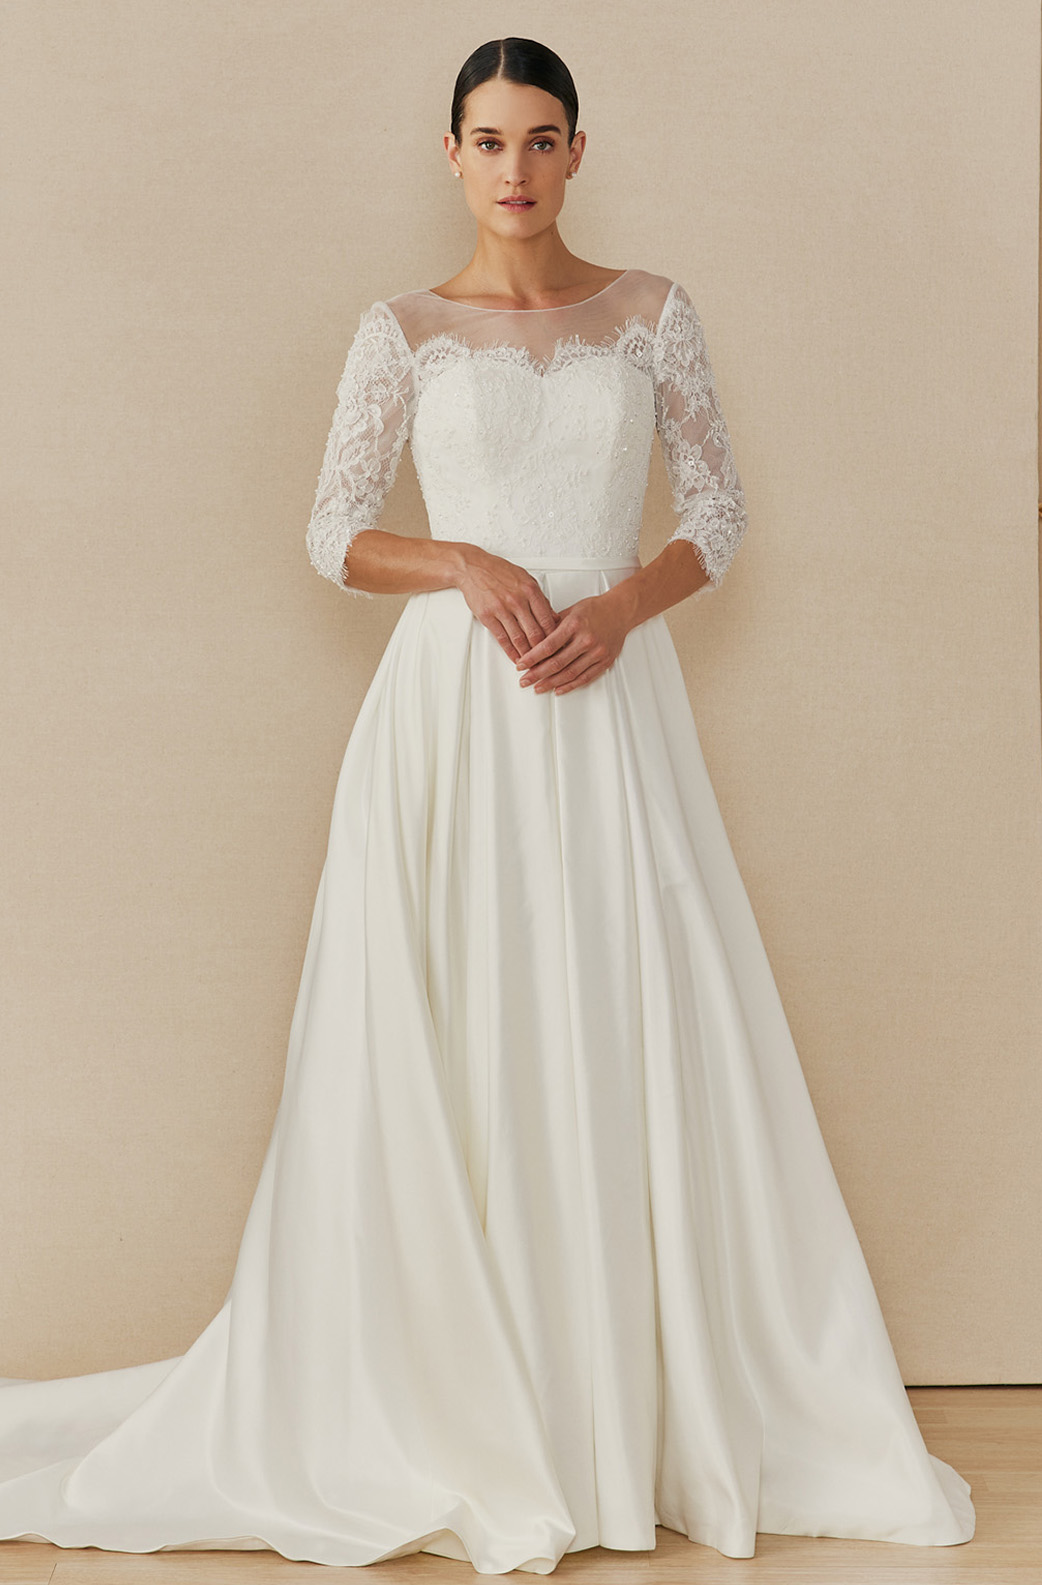 BATEAU NECK, 3/4 SLEEVES, BALL GOWN